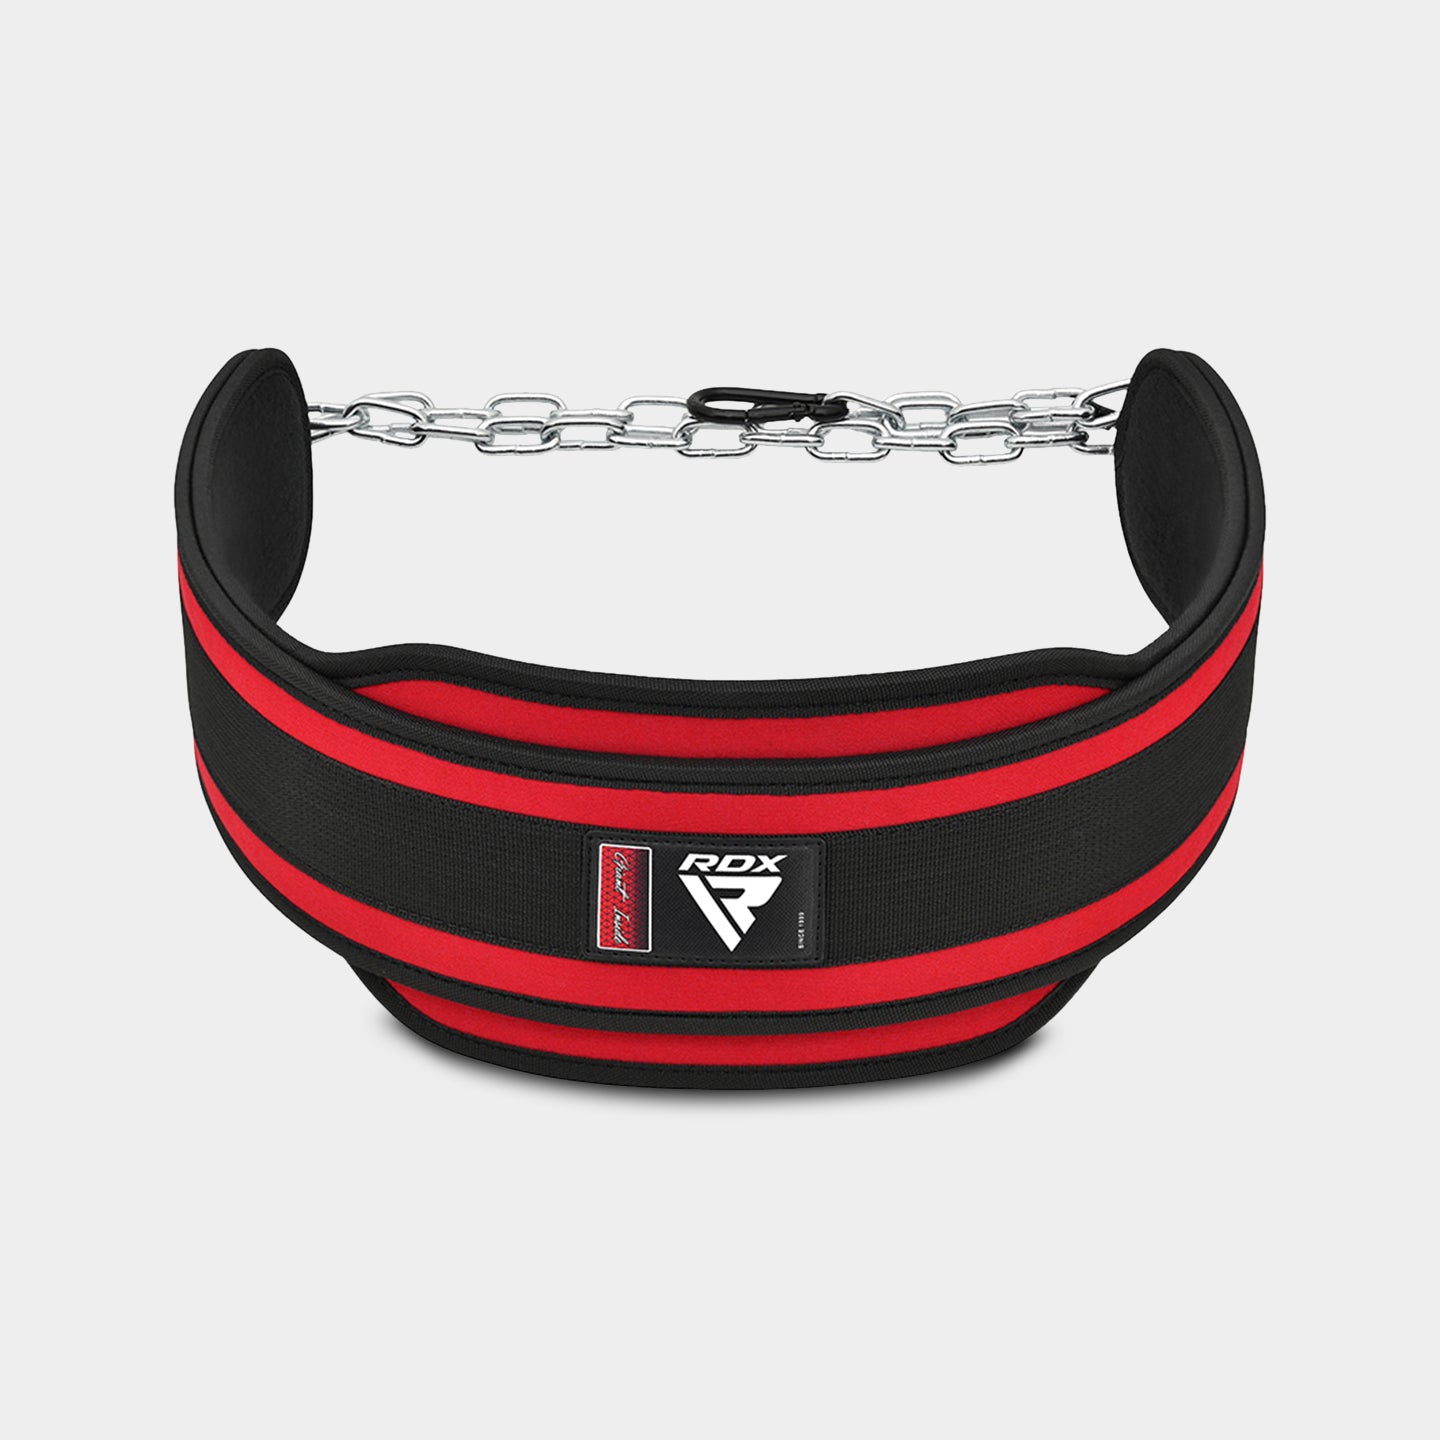 RDX Sports T7 Weight Training Dipping Belt With Chain, Standard Size, Red A1